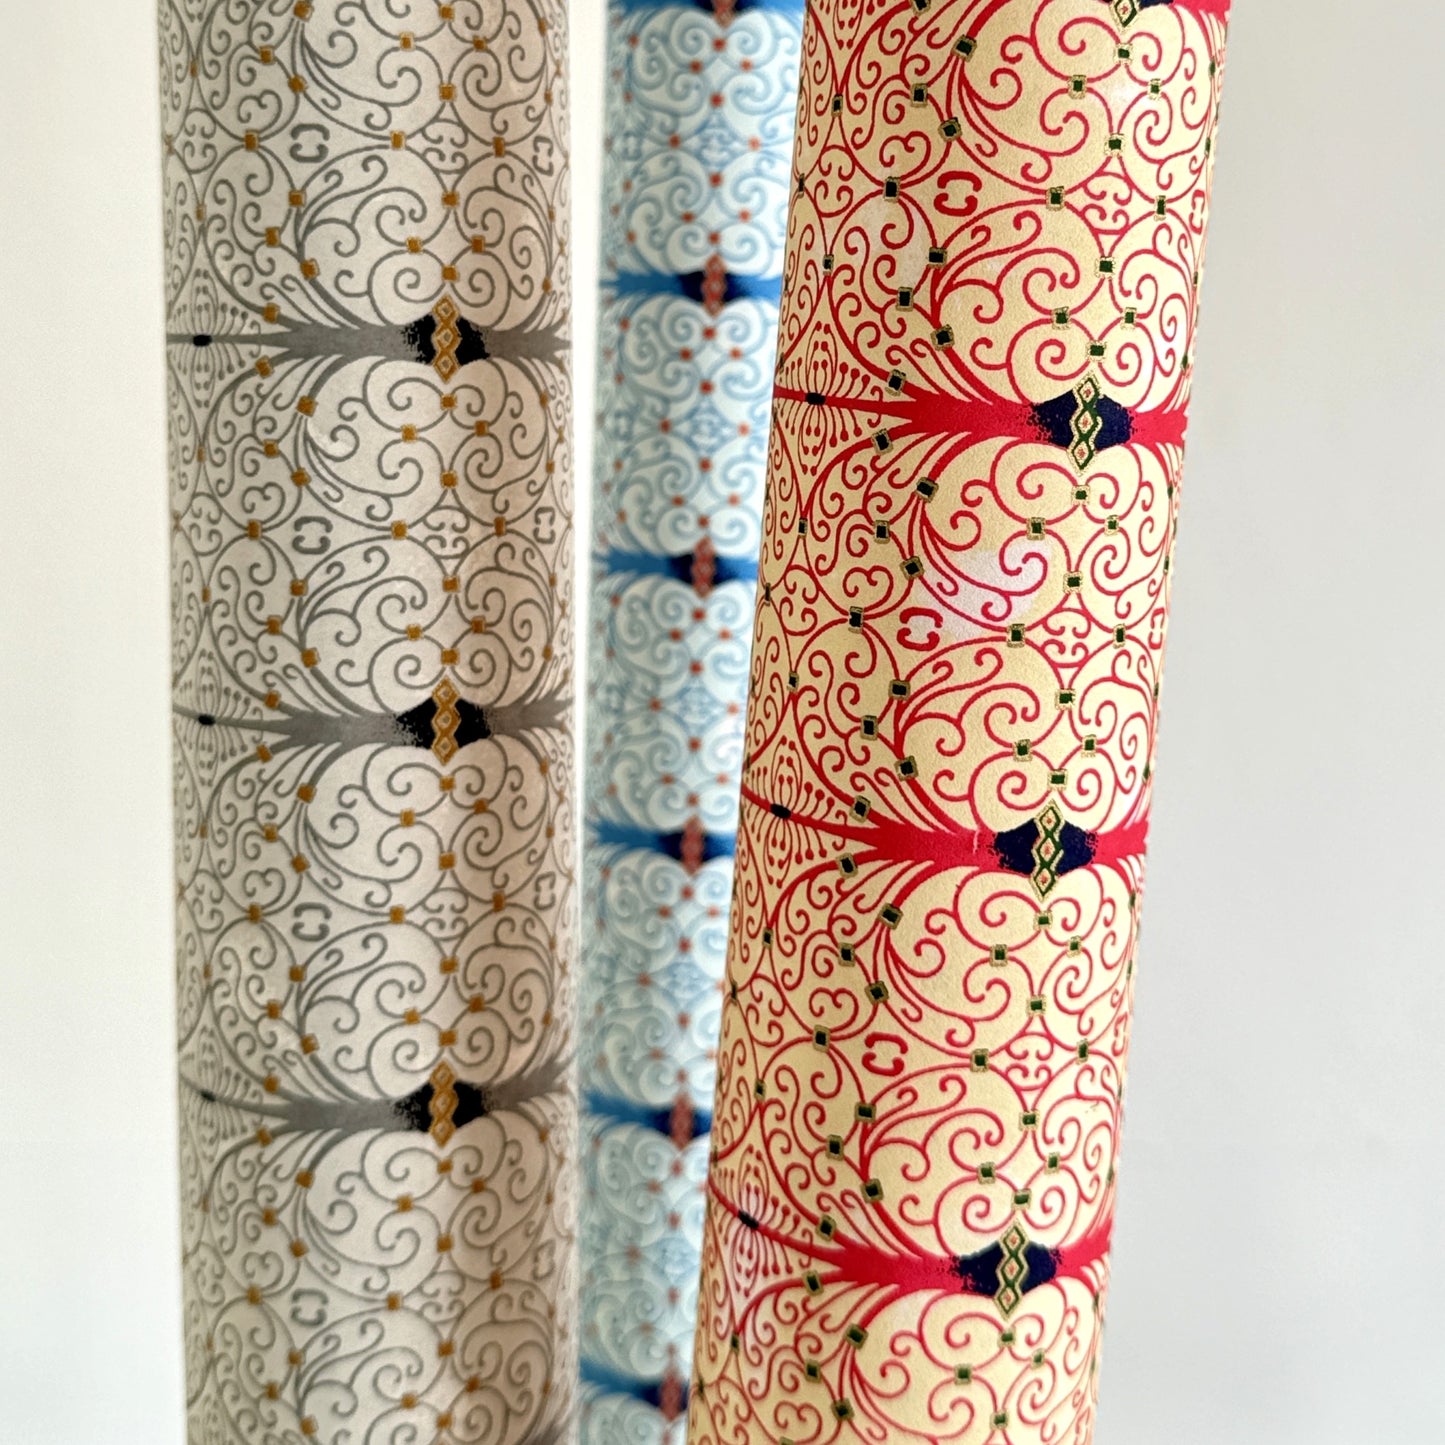 Japanese silkscreen chiyogami paper with a intricate filigree trellis design in pink with gold accent, pictured with rolled sheets of other designs